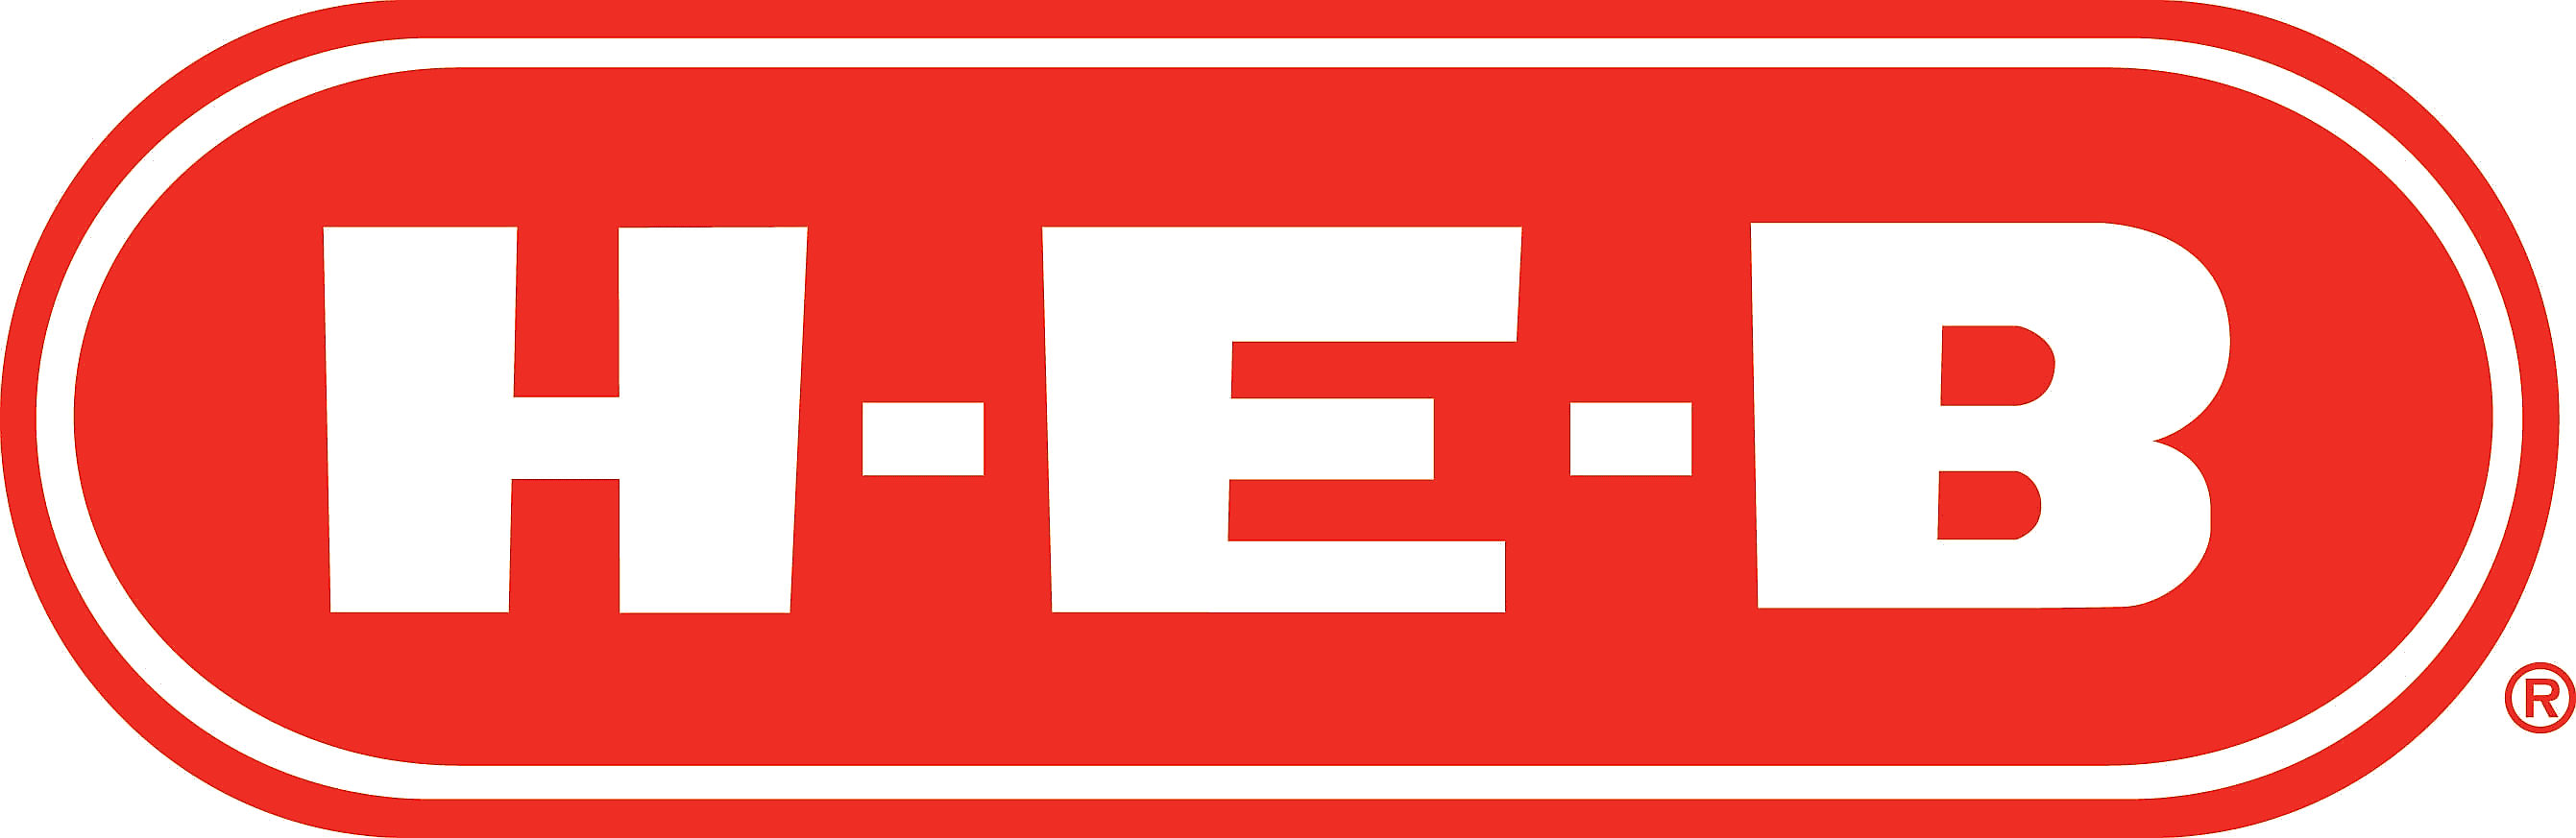 HEB Logo - File:Logo of the HEB Grocery Company, LP.png - Wikimedia Commons